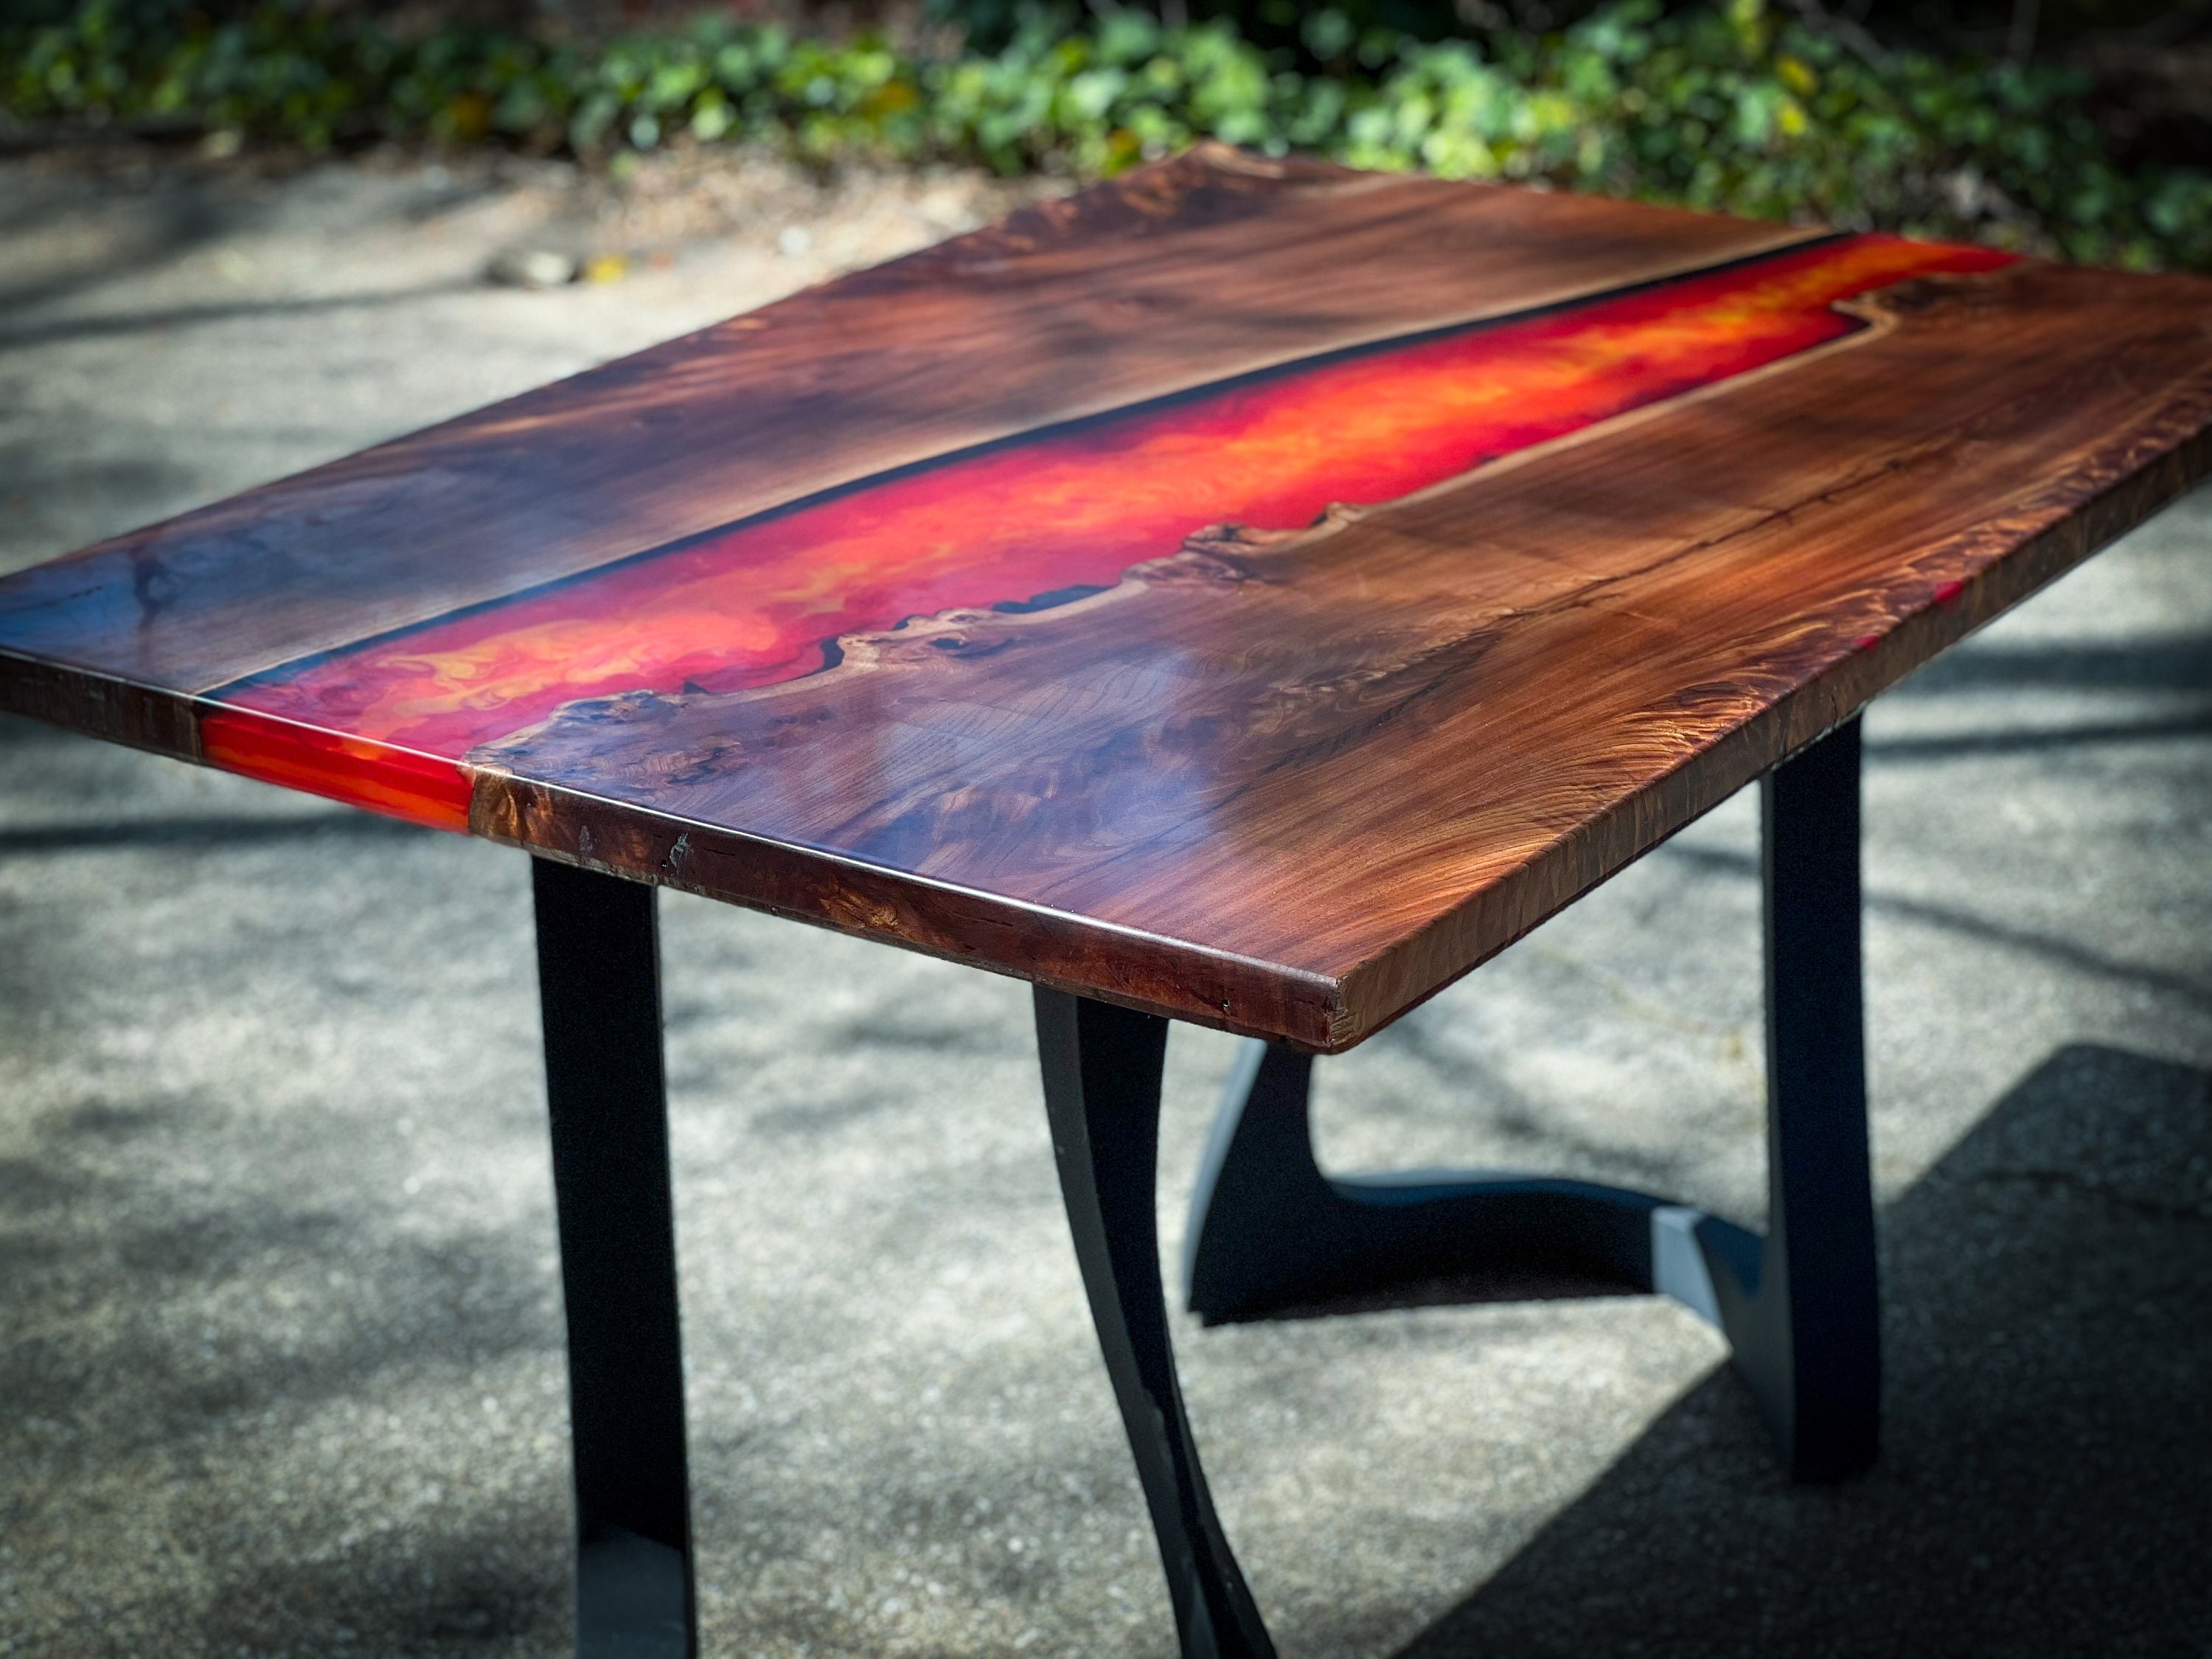 How to Make a Flowing Lava River Gaming Desk